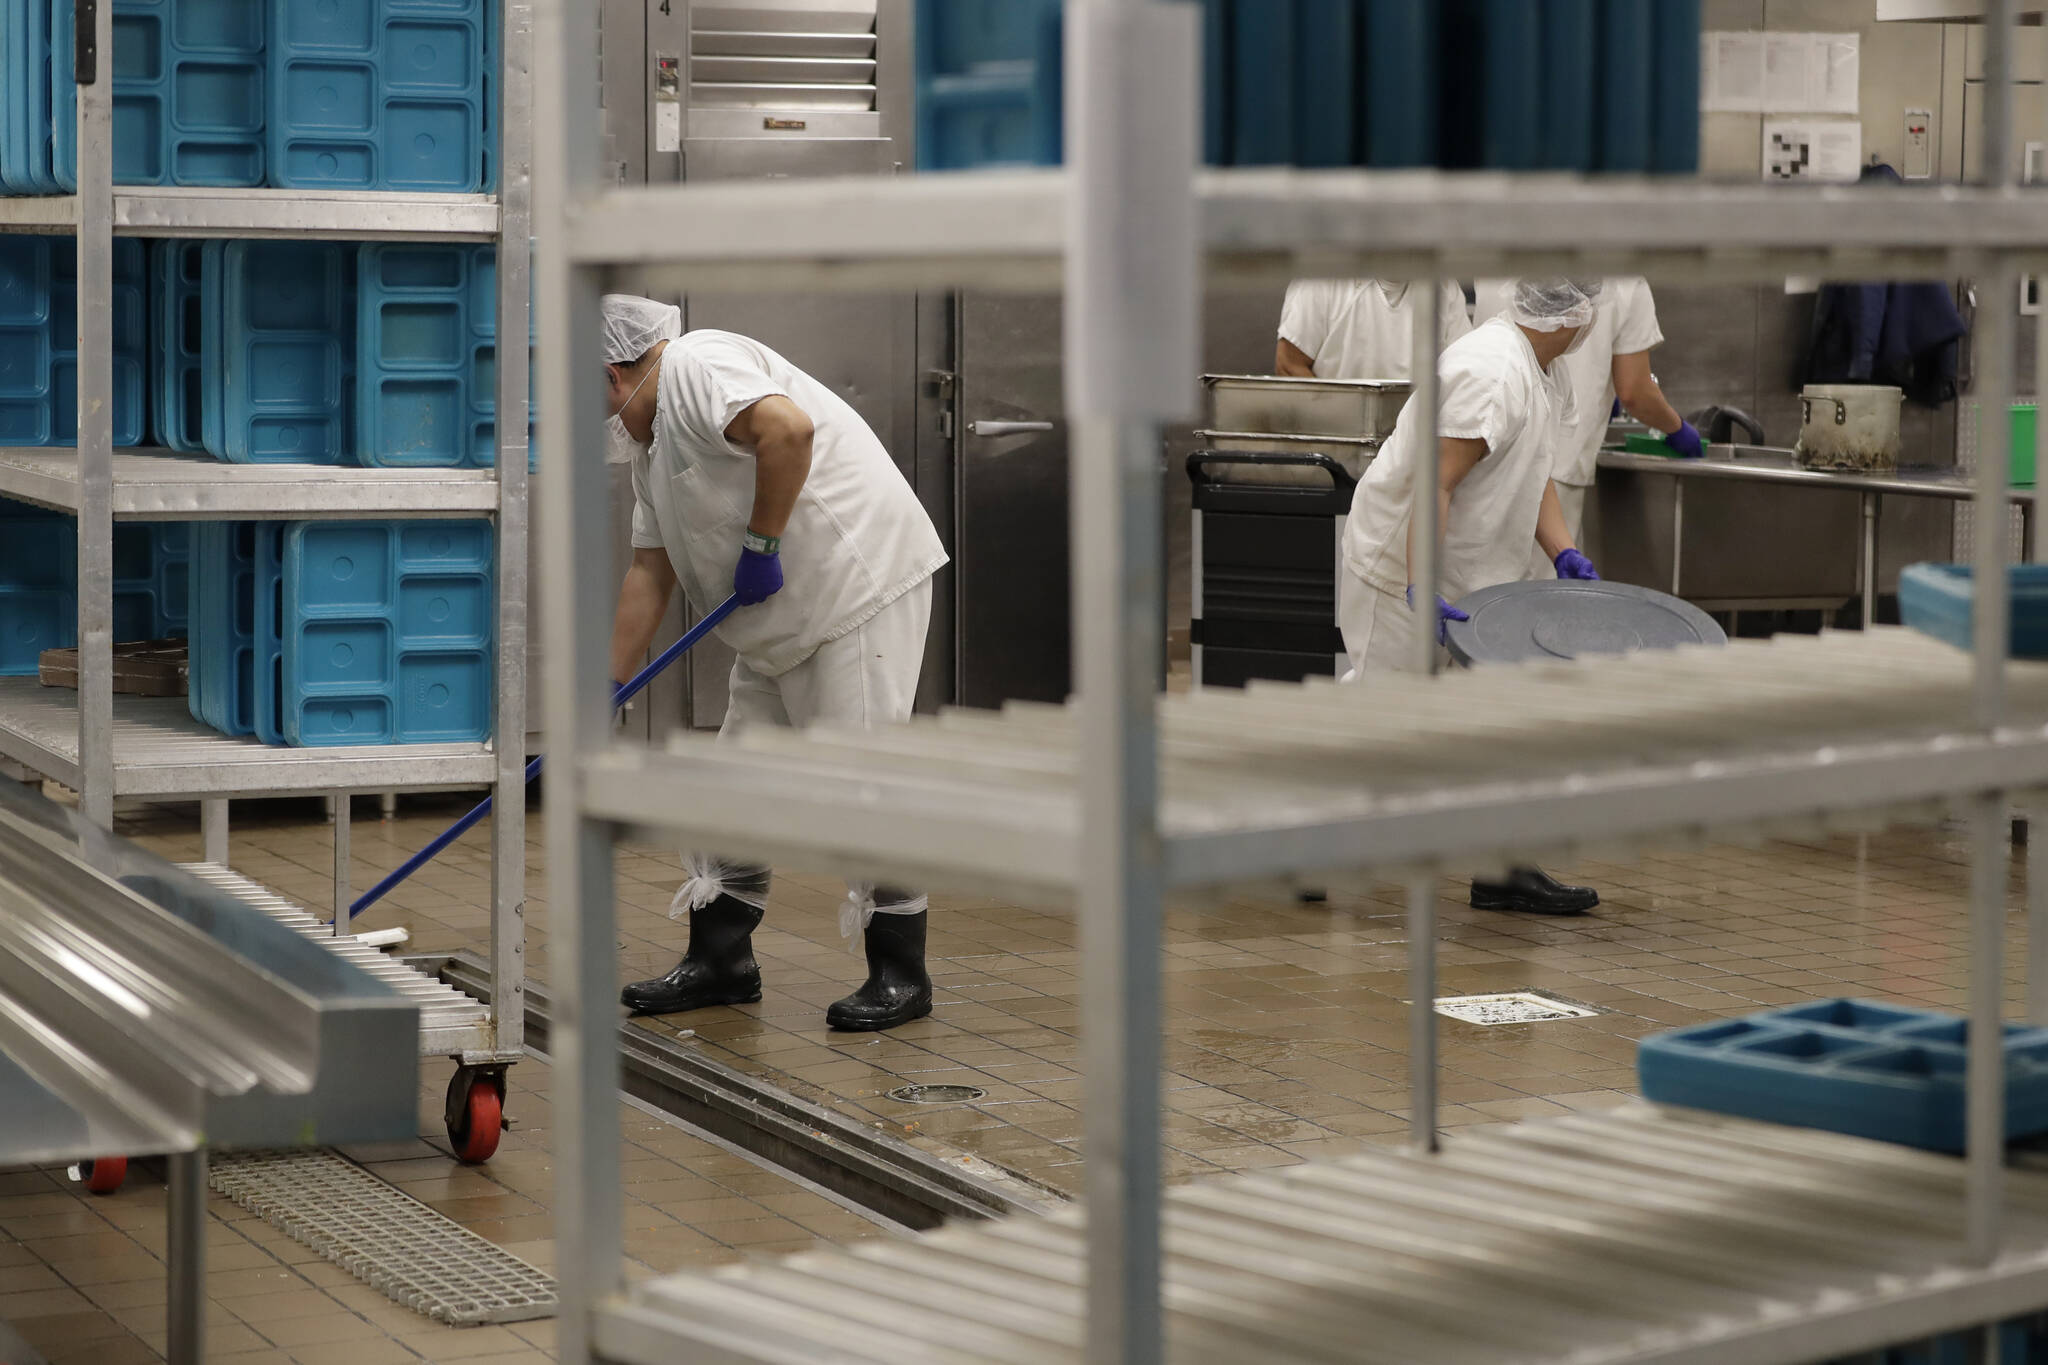 Workers are shown in the kitchen of The GEO Group’s immigration detention center in Tacoma during a media tour, Sept. 10, 2019. (AP Photo/Ted S. Warren, File)